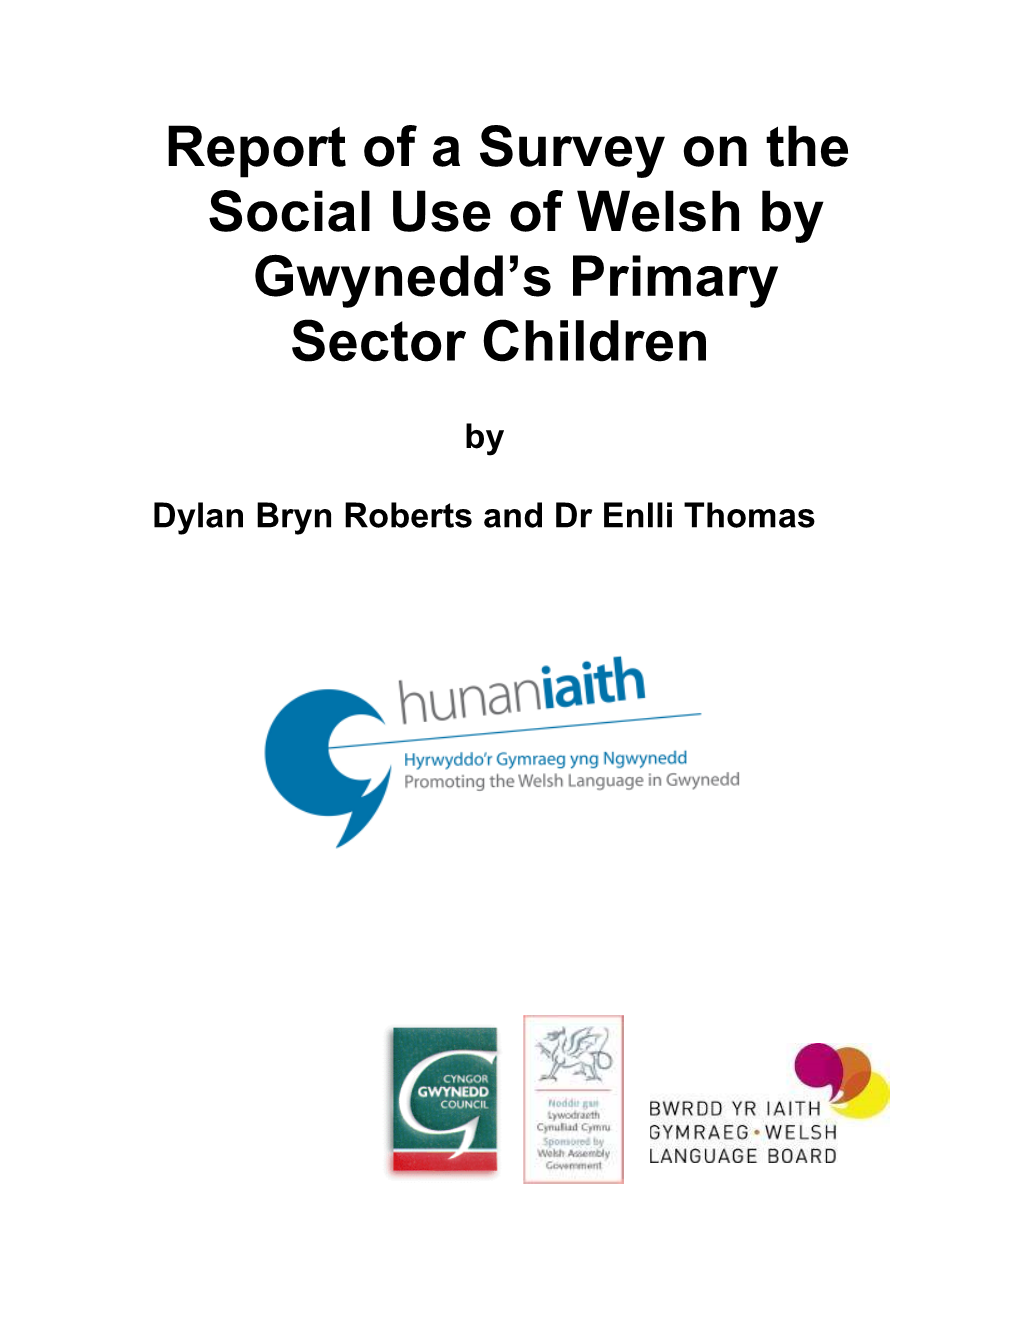 Report of a Survey on the Social Use of Welsh by Gwynedd's Primary